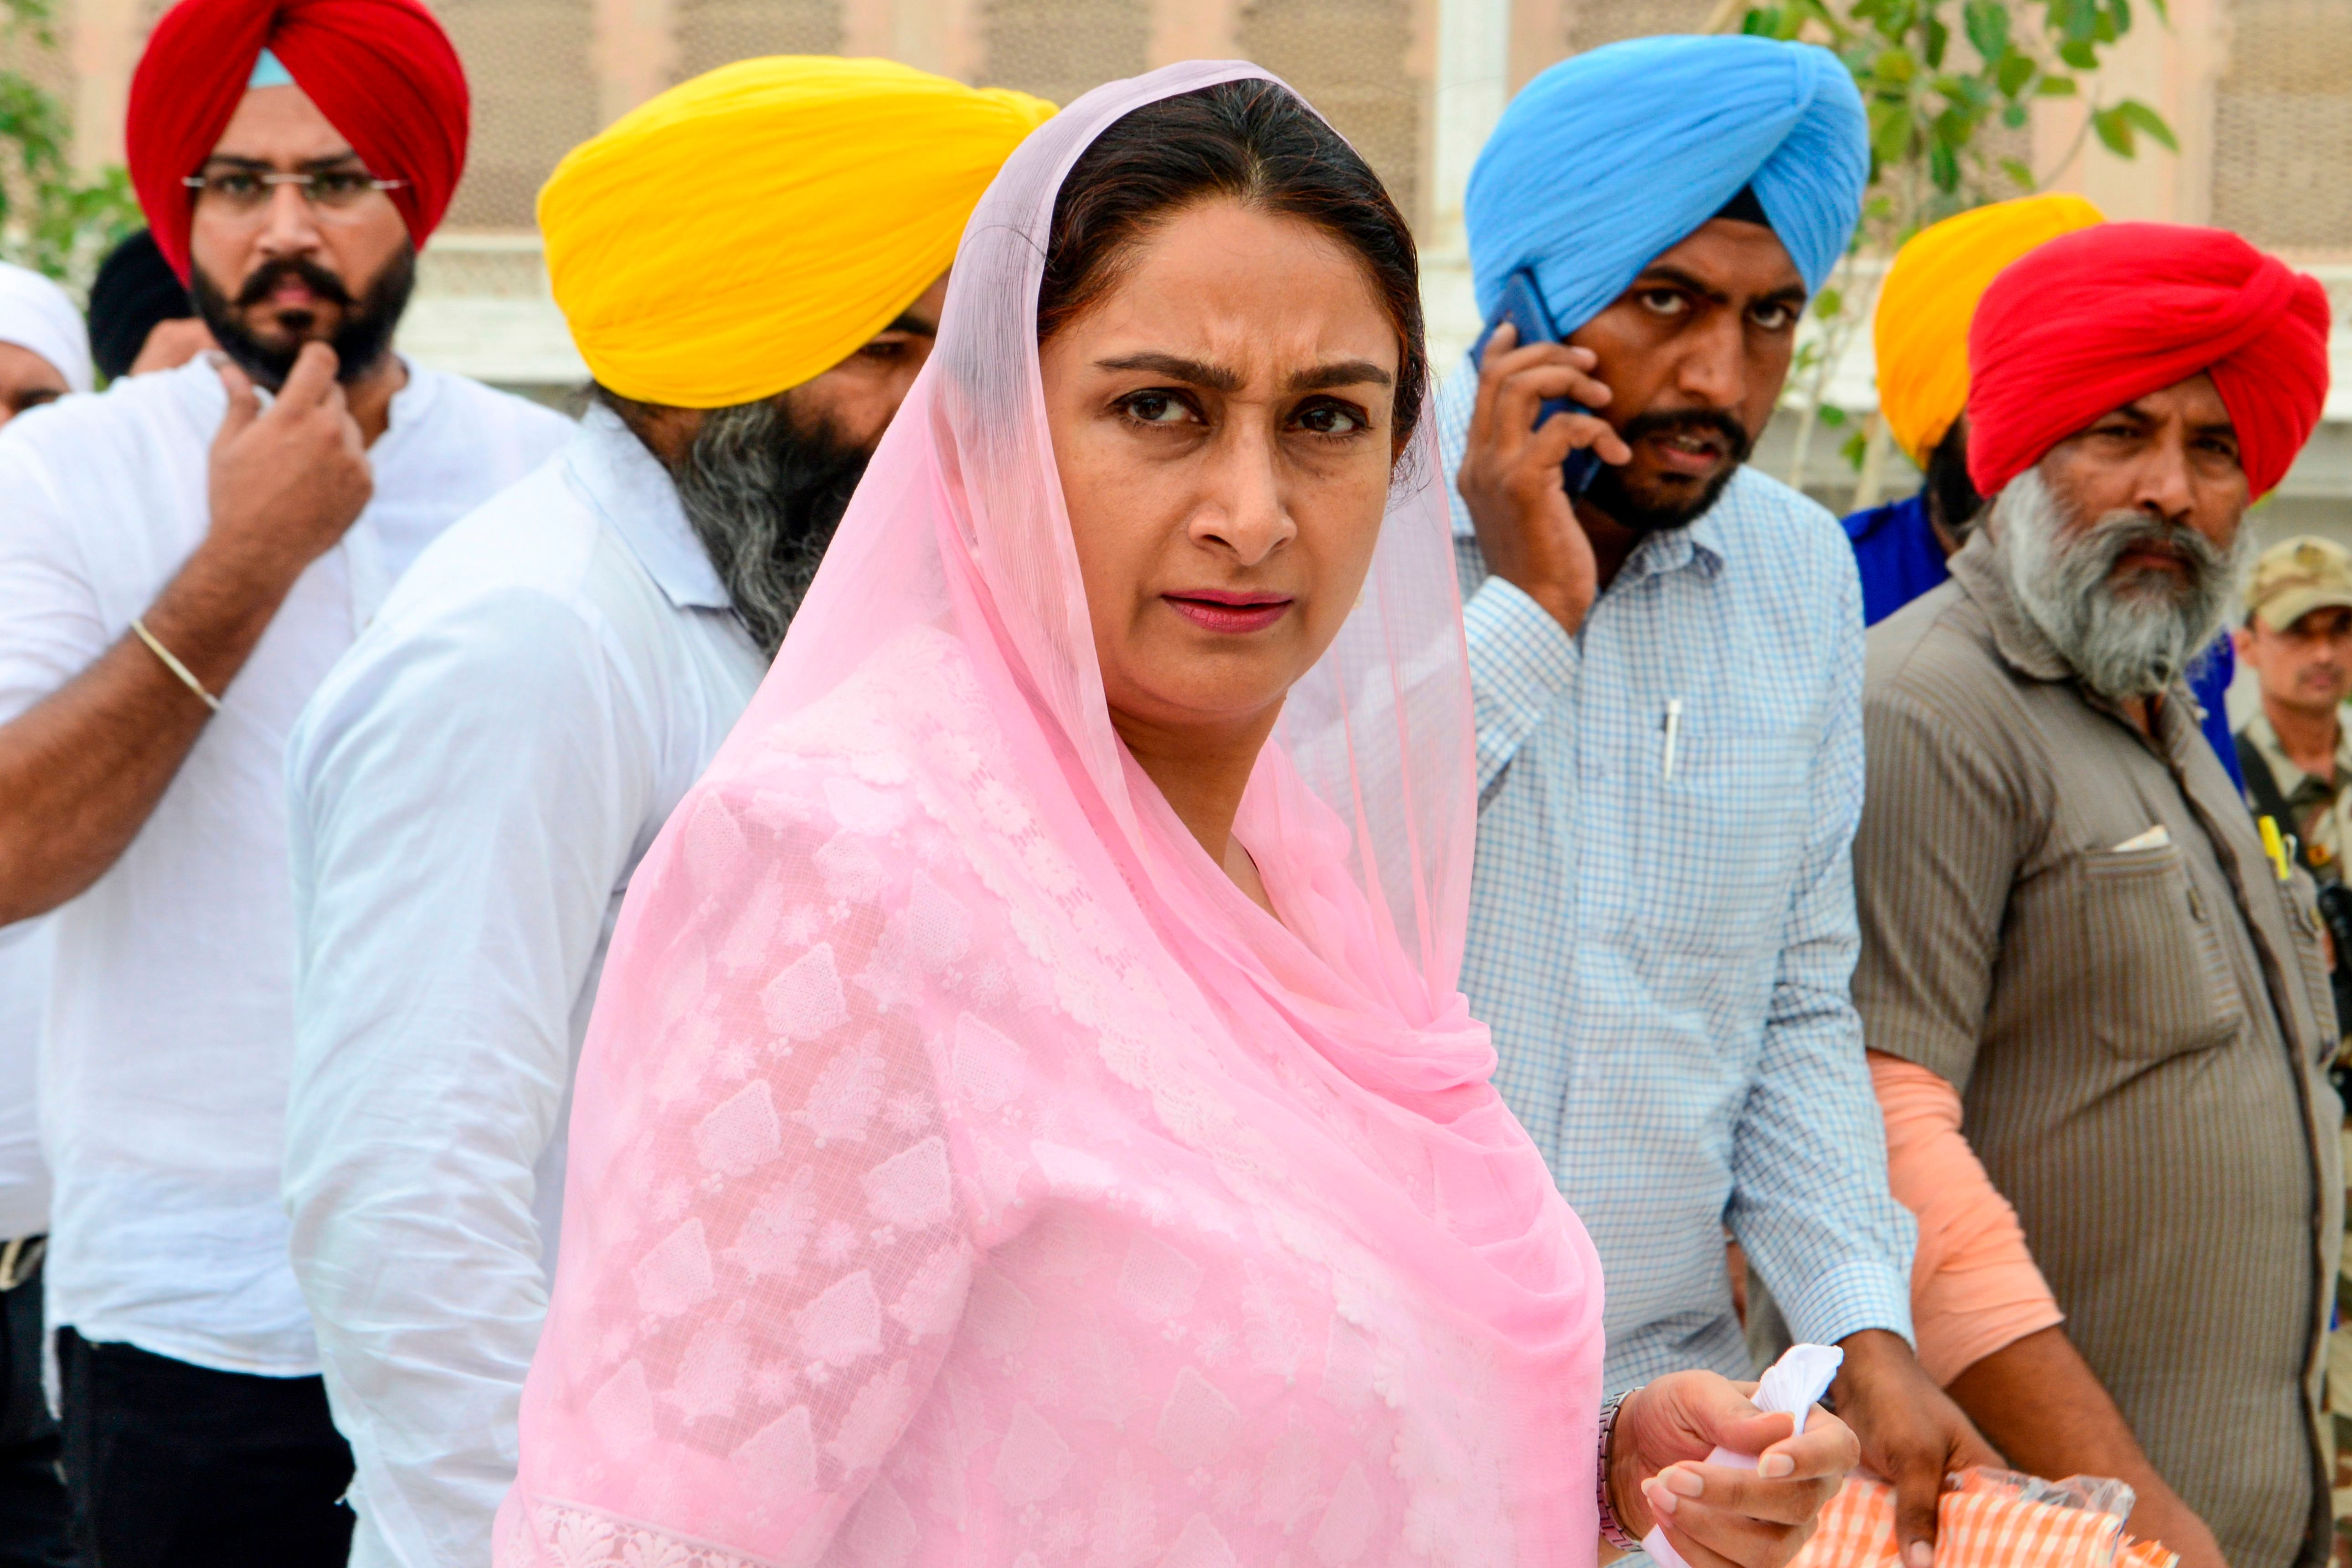 Union Cabinet Minister of Food Processing, Harsimrat Kaur Badal (C), pays her respect at the Golden Temple in Amritsar. (PTI Photo)